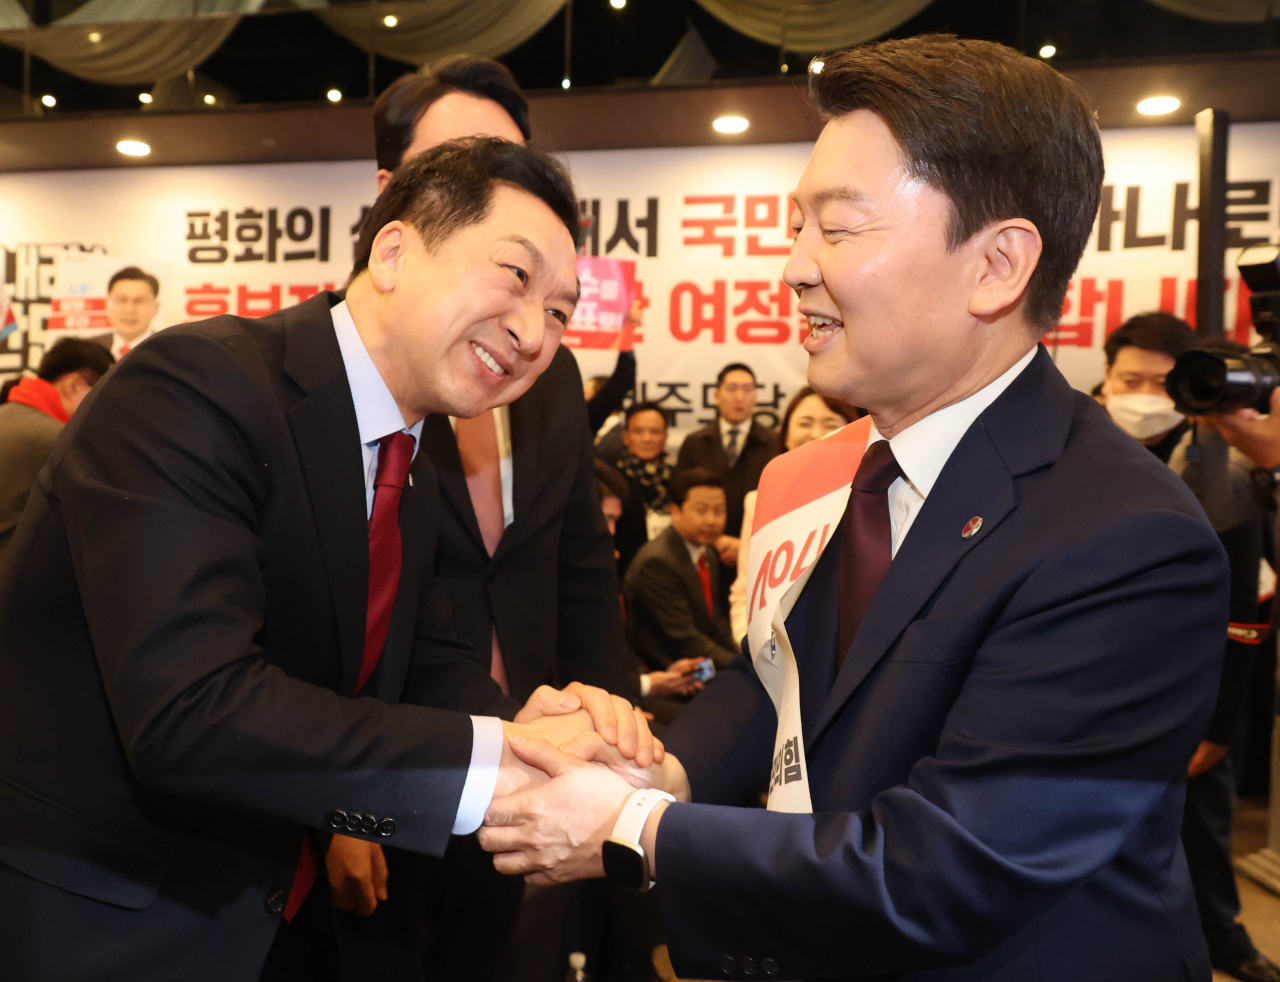 Two leading candidates for the ruling People Power Party chair, Reps. Kim Gi-hyeon (left) and Ahn Cheol-soo, shake hands at a hotel in Jeju on Monday. (Yonhap)